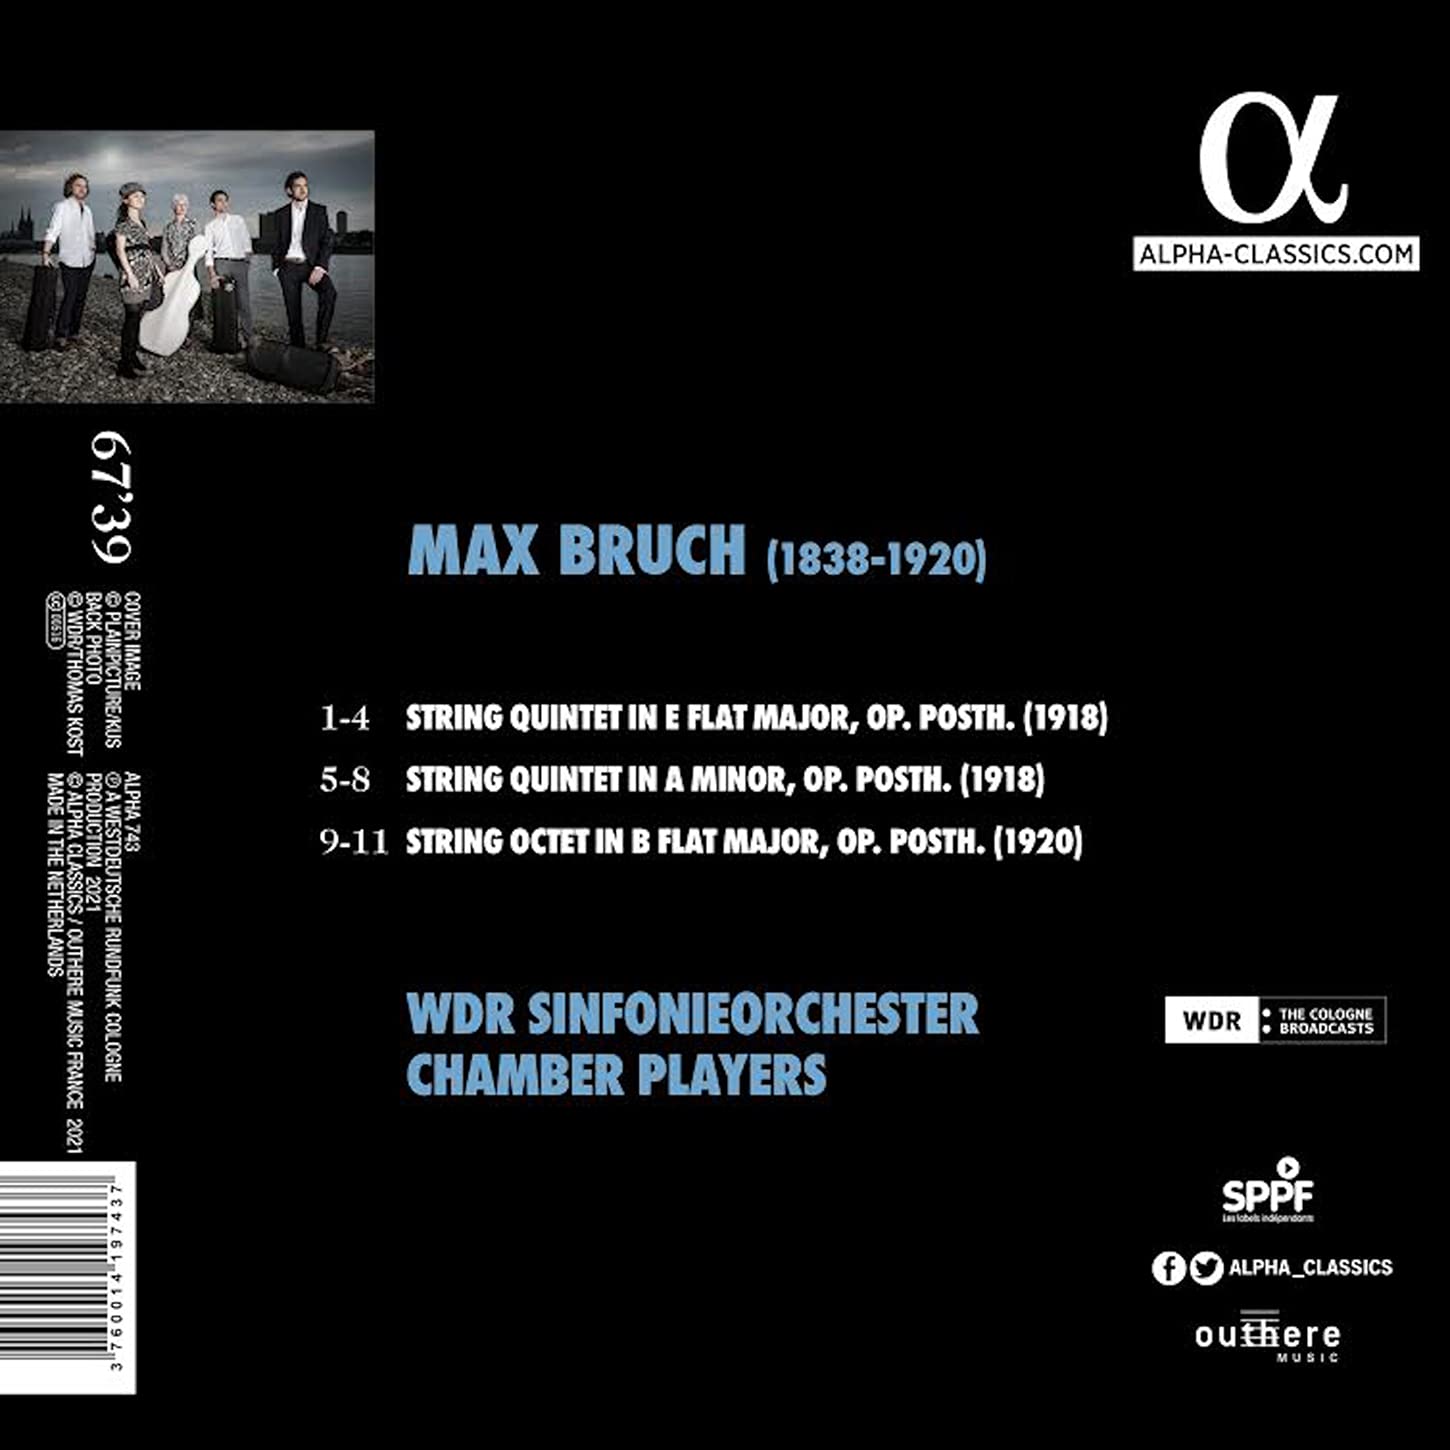 WDR Chamber Players 막스 브루흐: 현악 오중주, 현악 팔중주 (Max Bruch: String Quintets Op.Posth., String Octet Op.Posth.) 